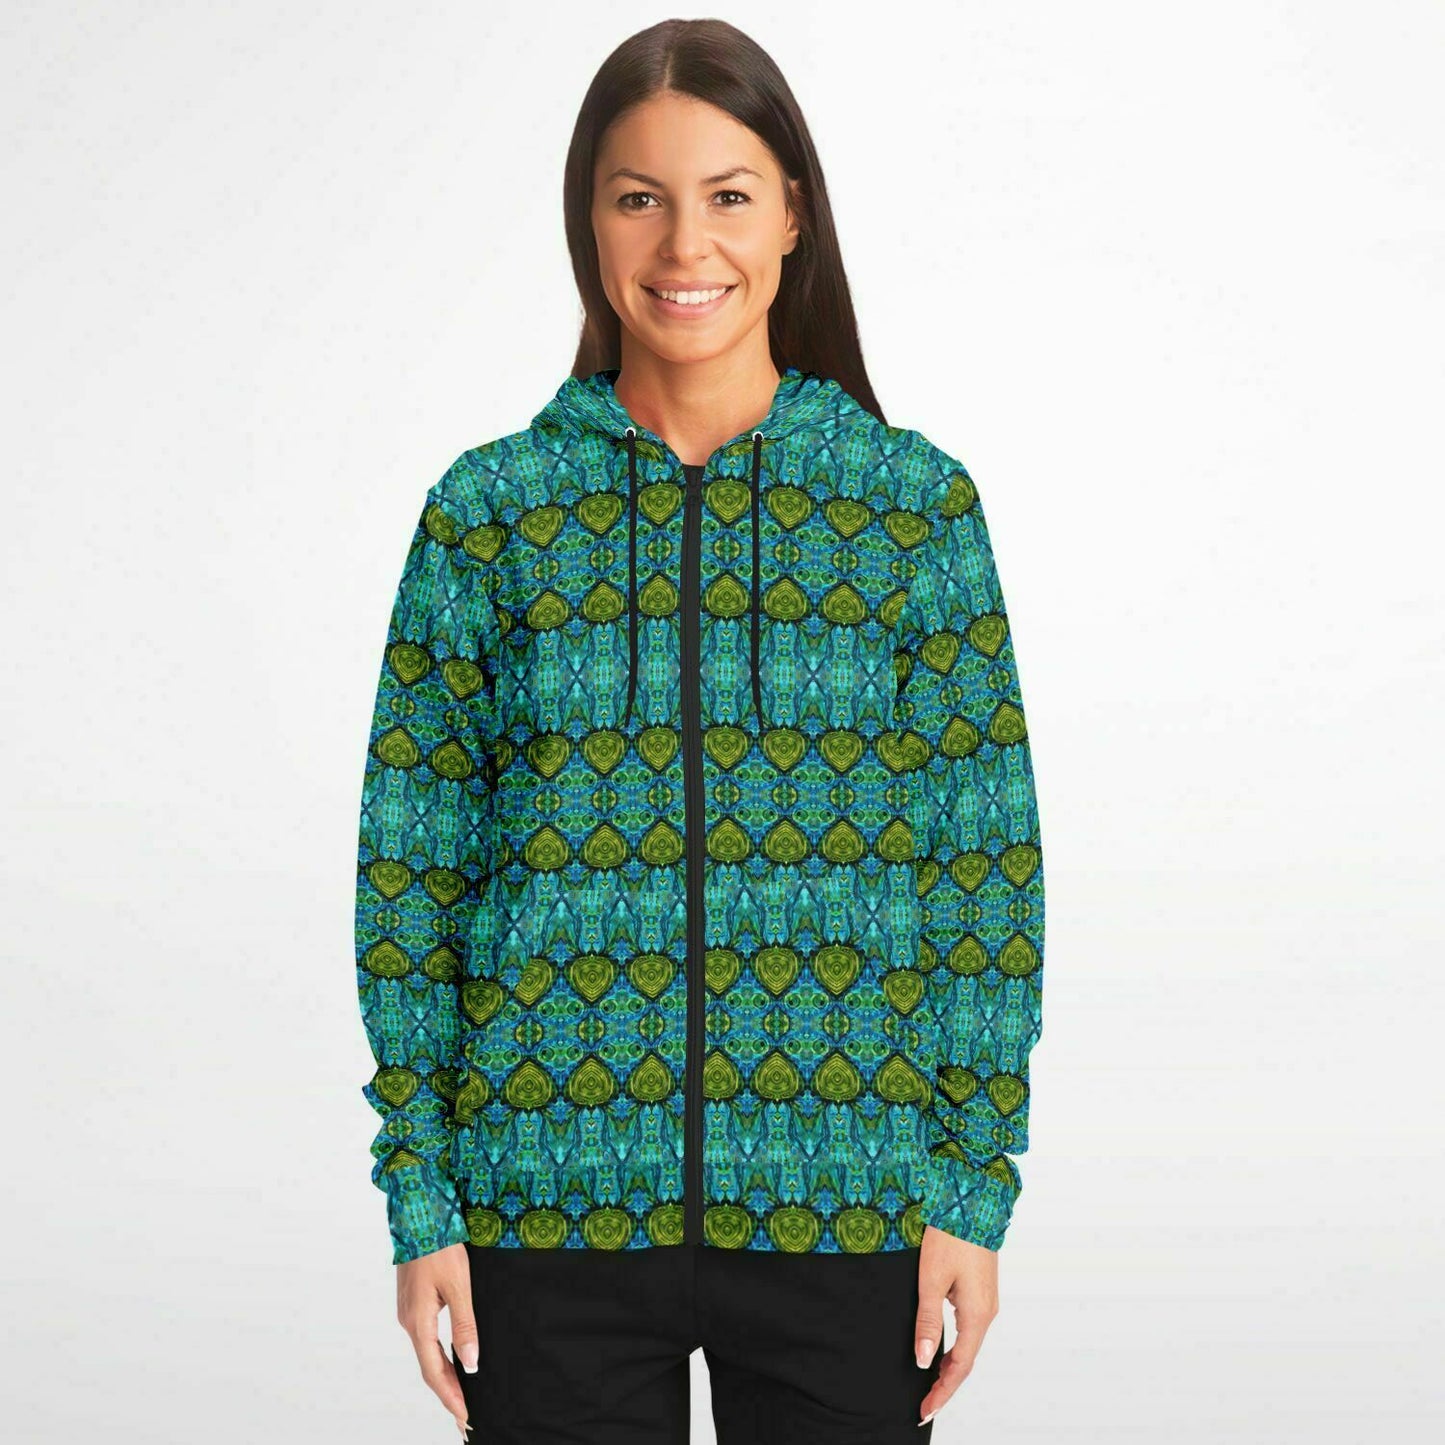 hoodies for women with colorful beautiful designs